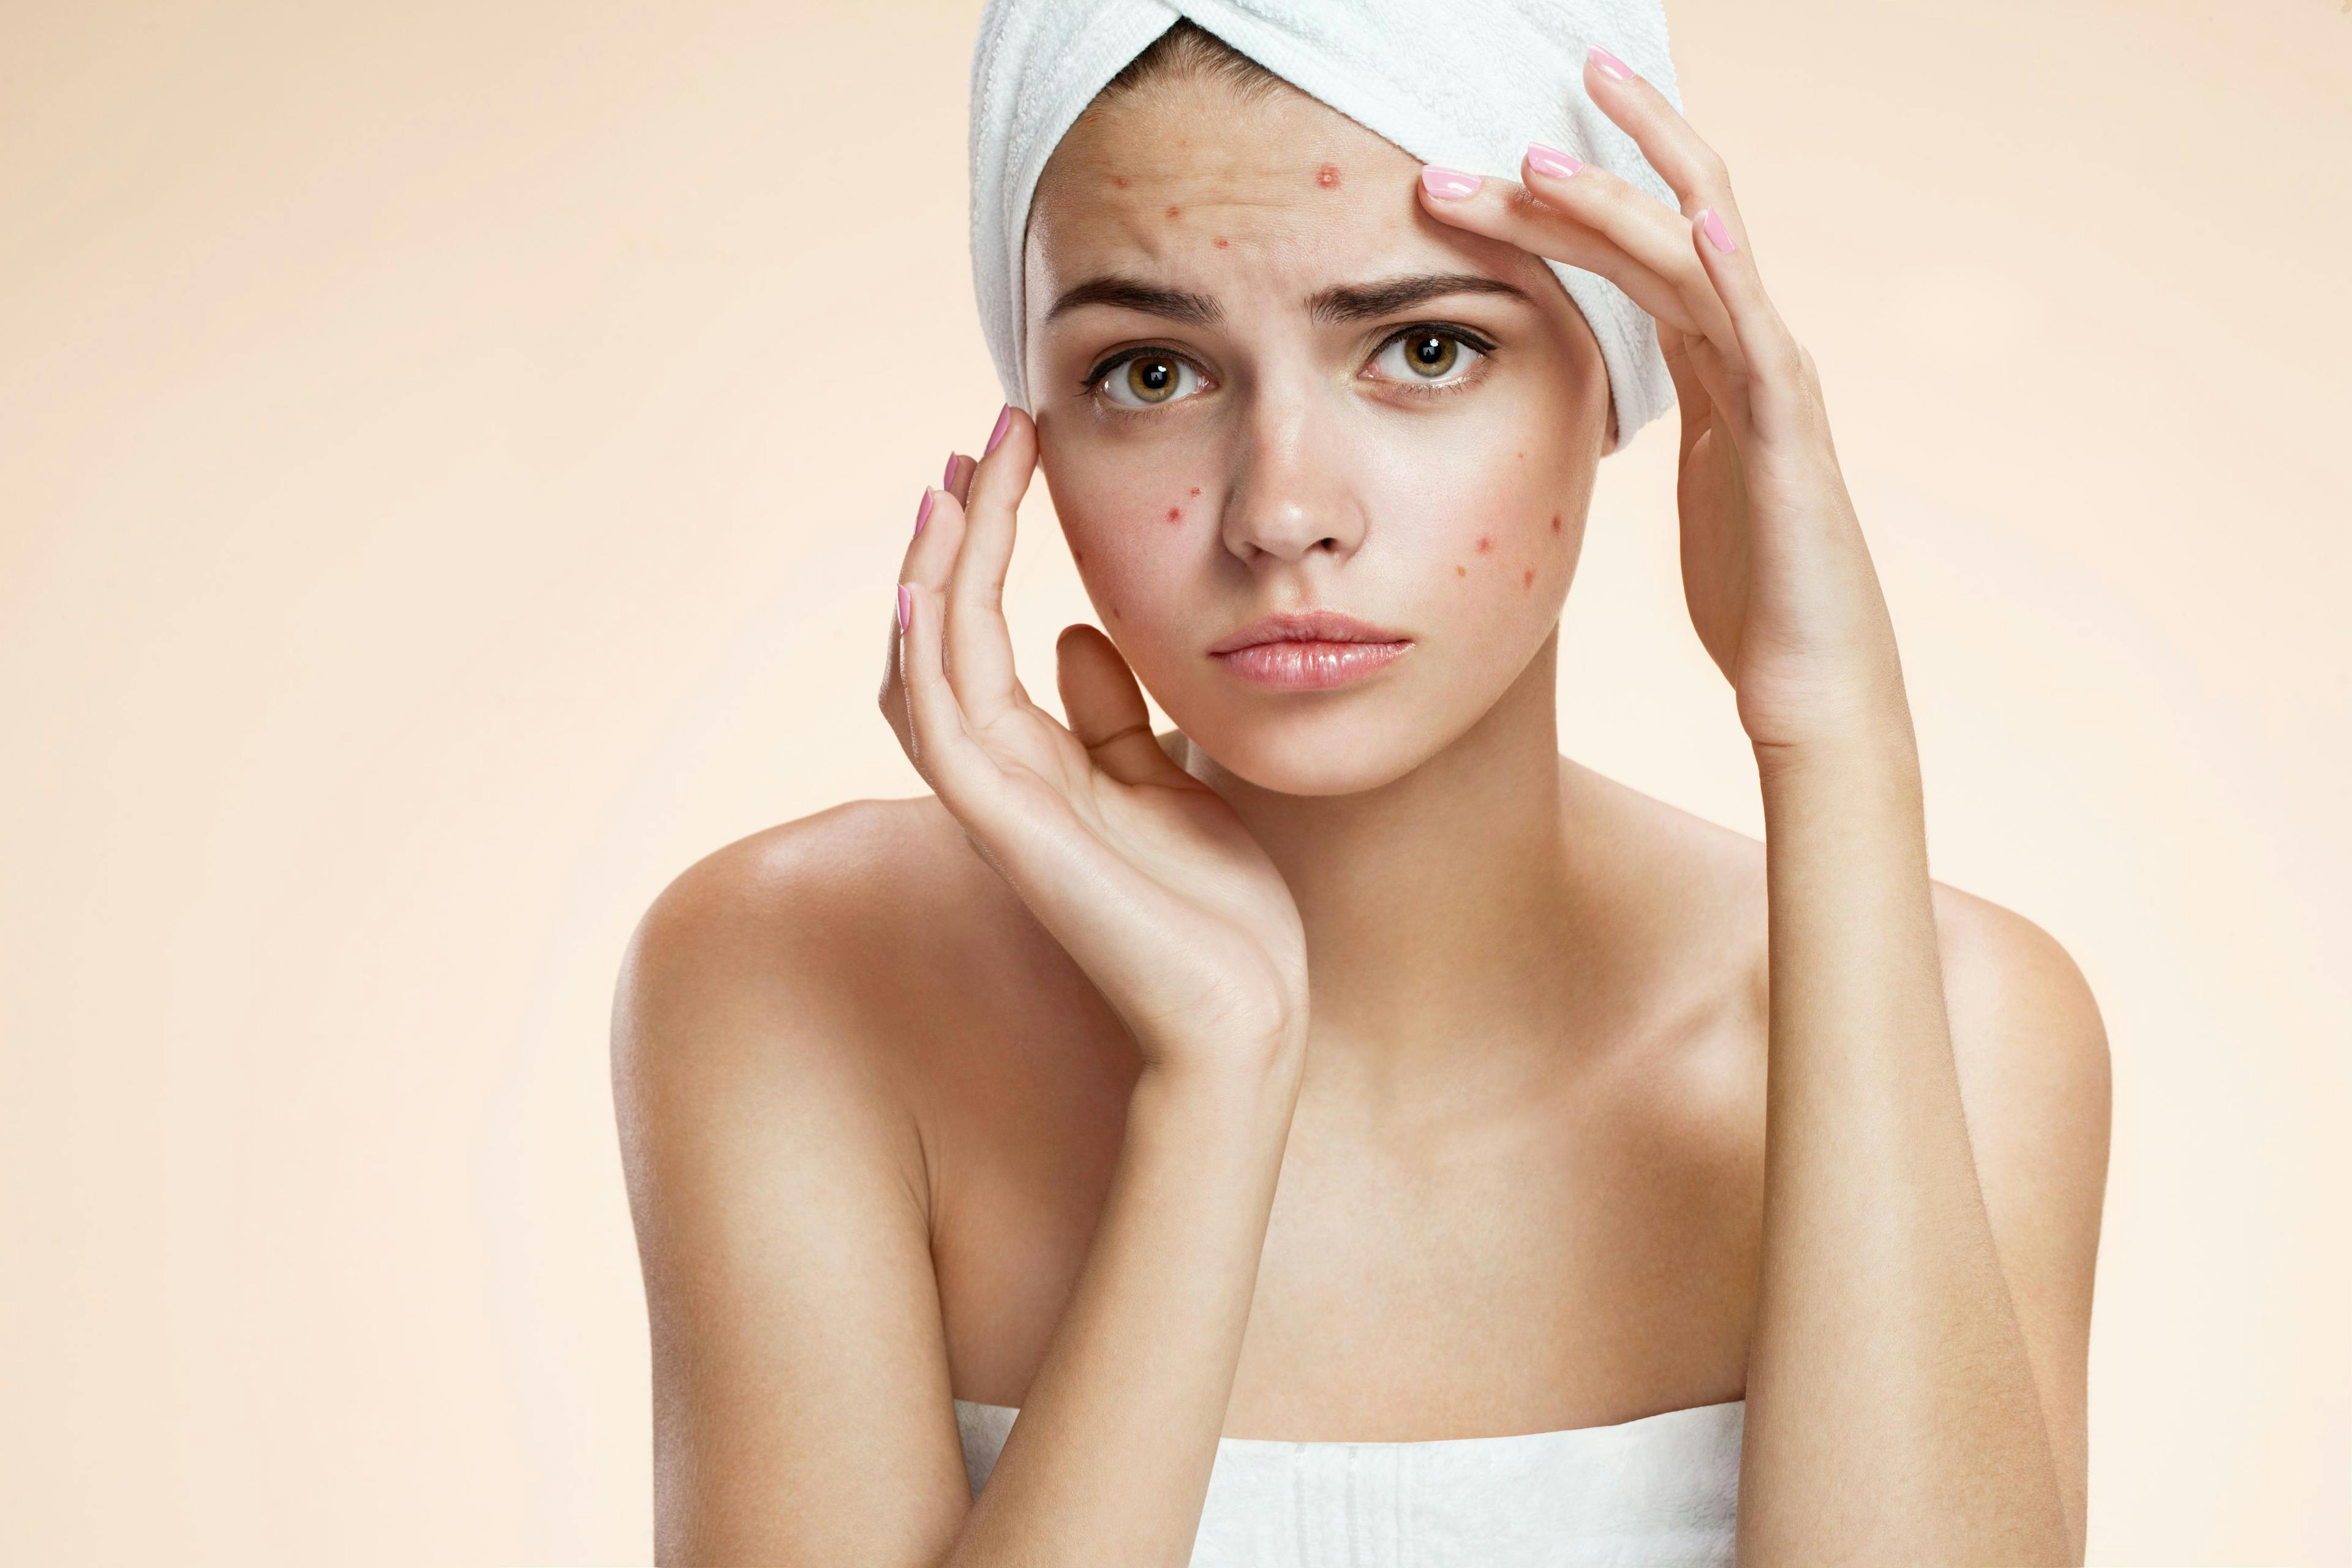 Treatment improves QOL for patients with acne 